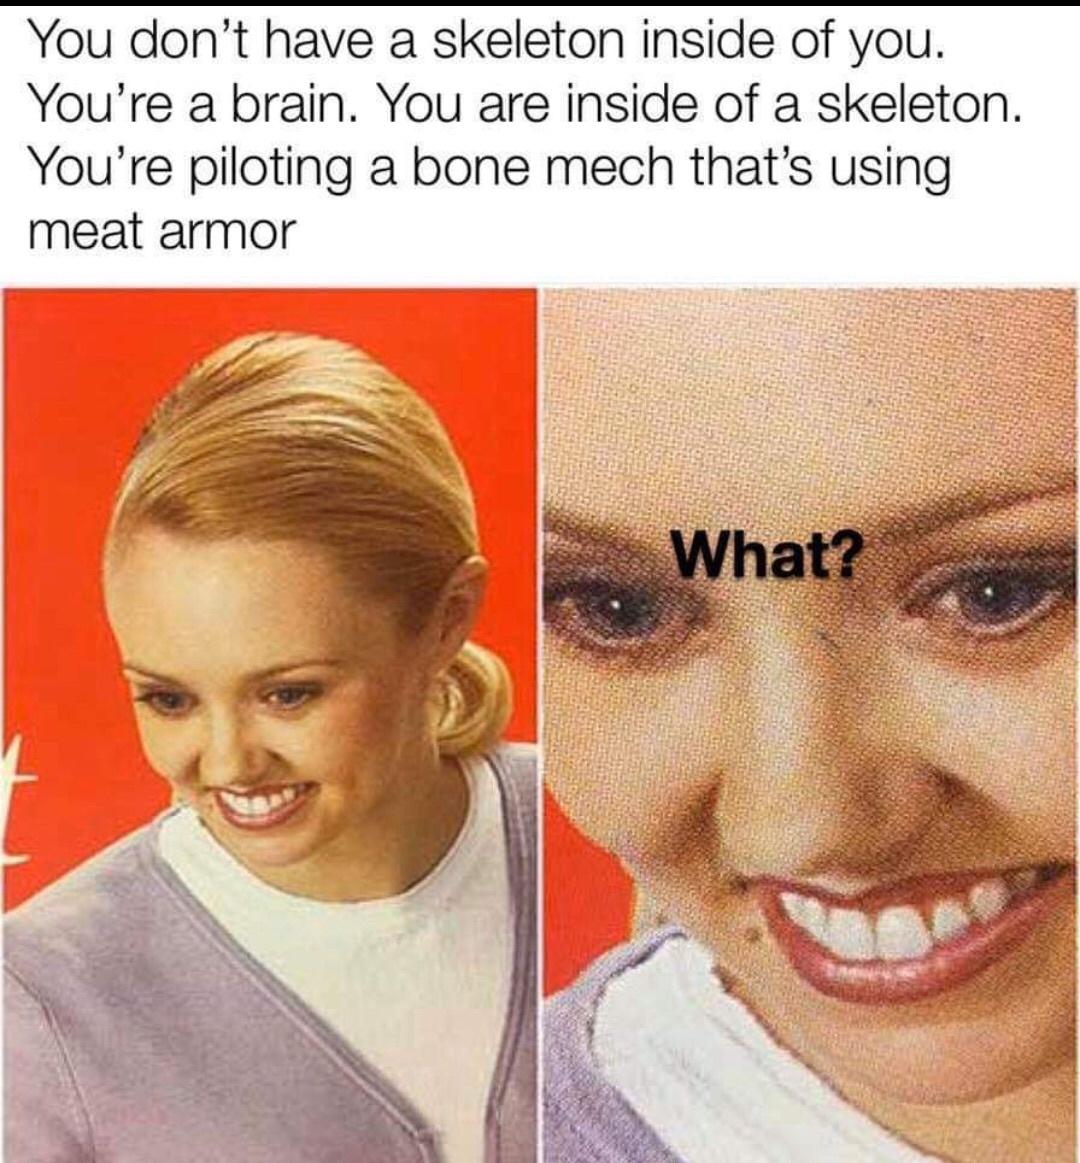 bone mech with meat armor - You don't have a skeleton inside of you. You're a brain. You are inside of a skeleton. You're piloting a bone mech that's using meat armor What?